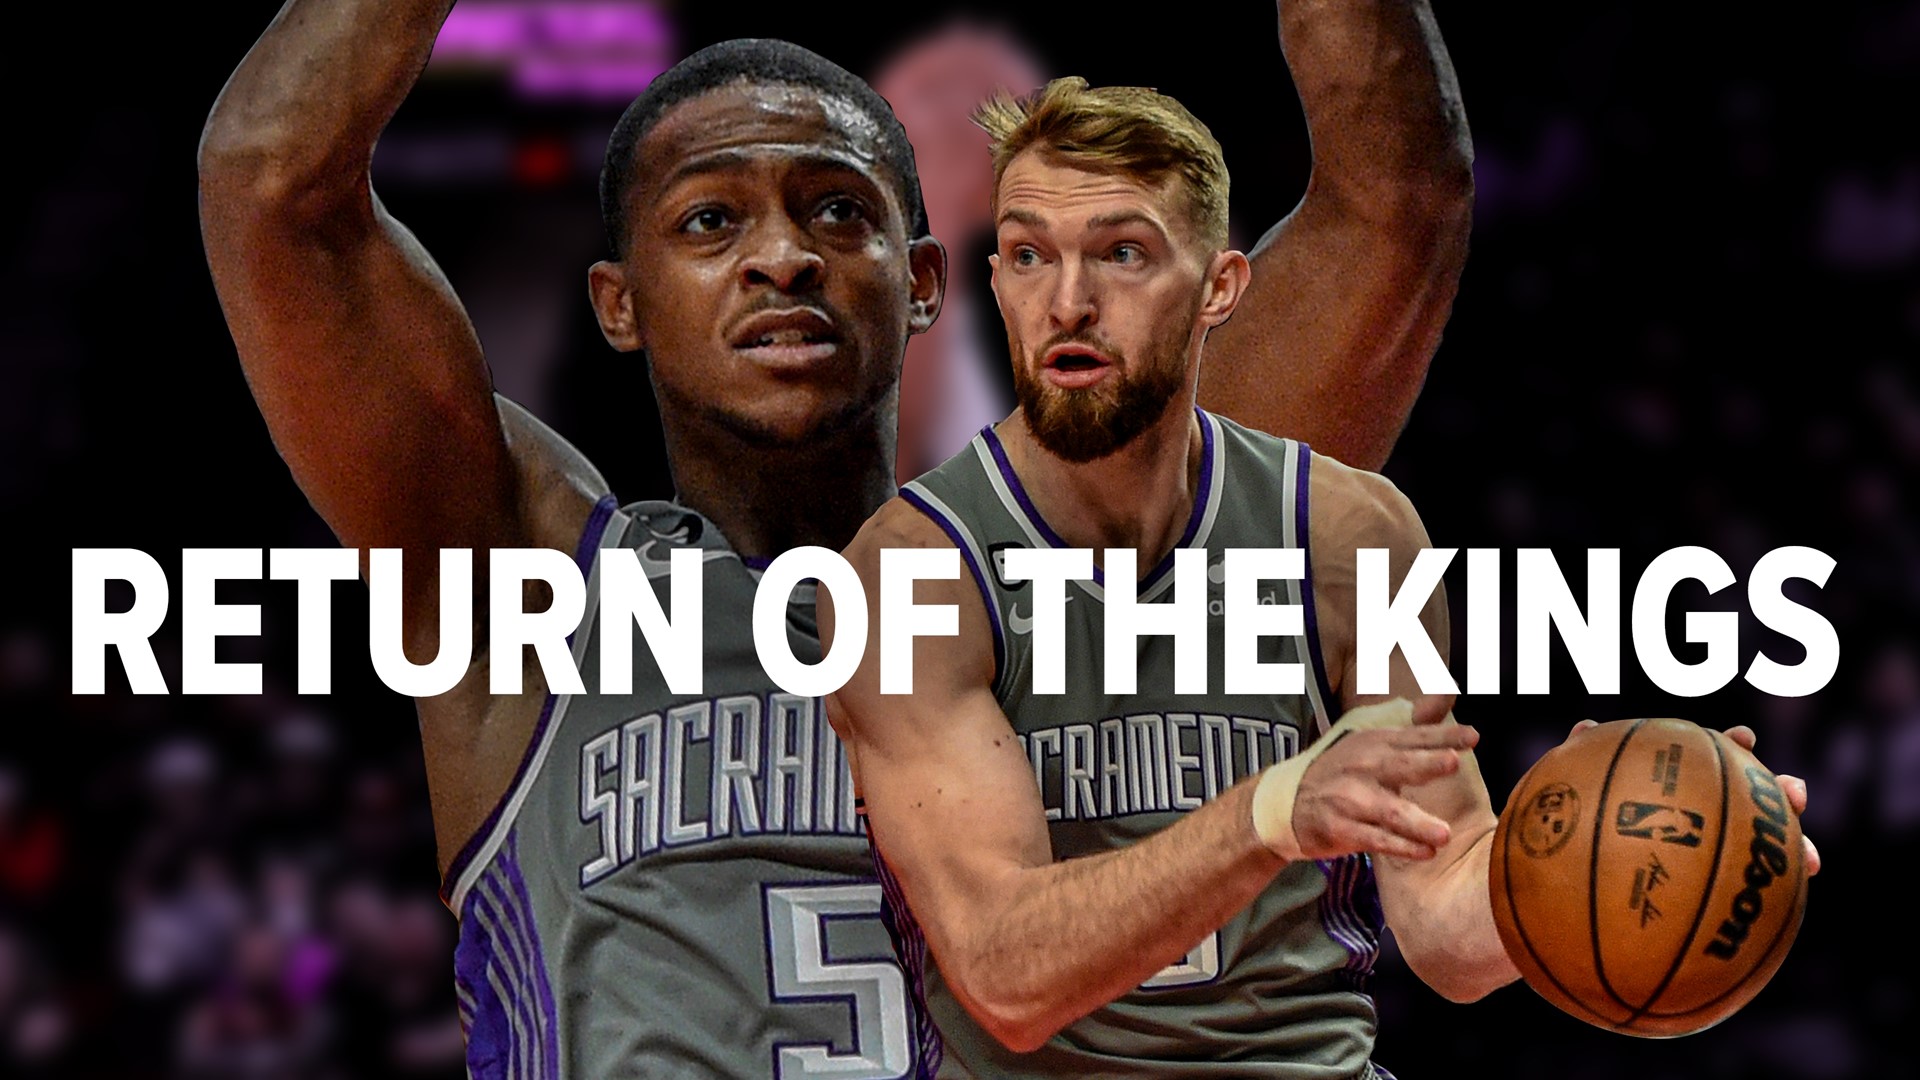 The Sacramento Kings would not be as big as they are now without the roaring fans, said our Sports Reporter Kevin John, and now they're more hyped than ever.